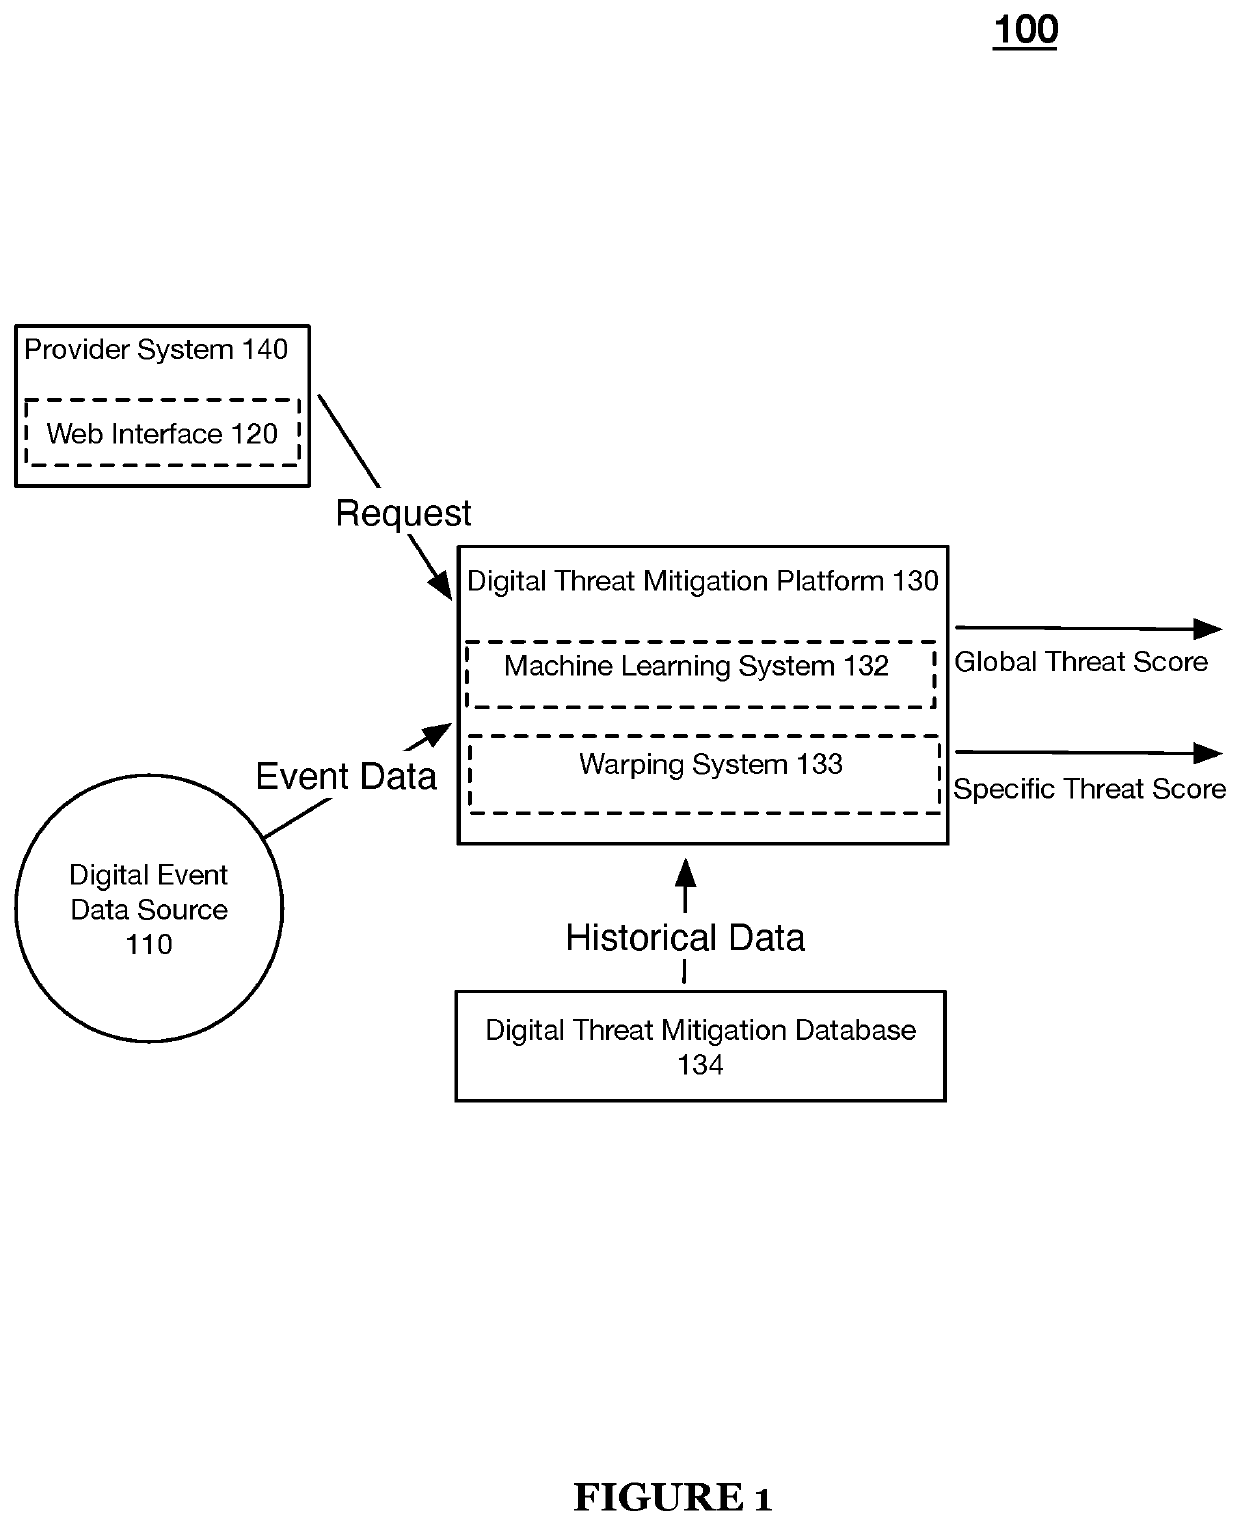 Systems and methods for machine learning-based digital content clustering, digital content threat detection, and digital content threat remediation in machine learning task-oriented digital threat mitigation platform